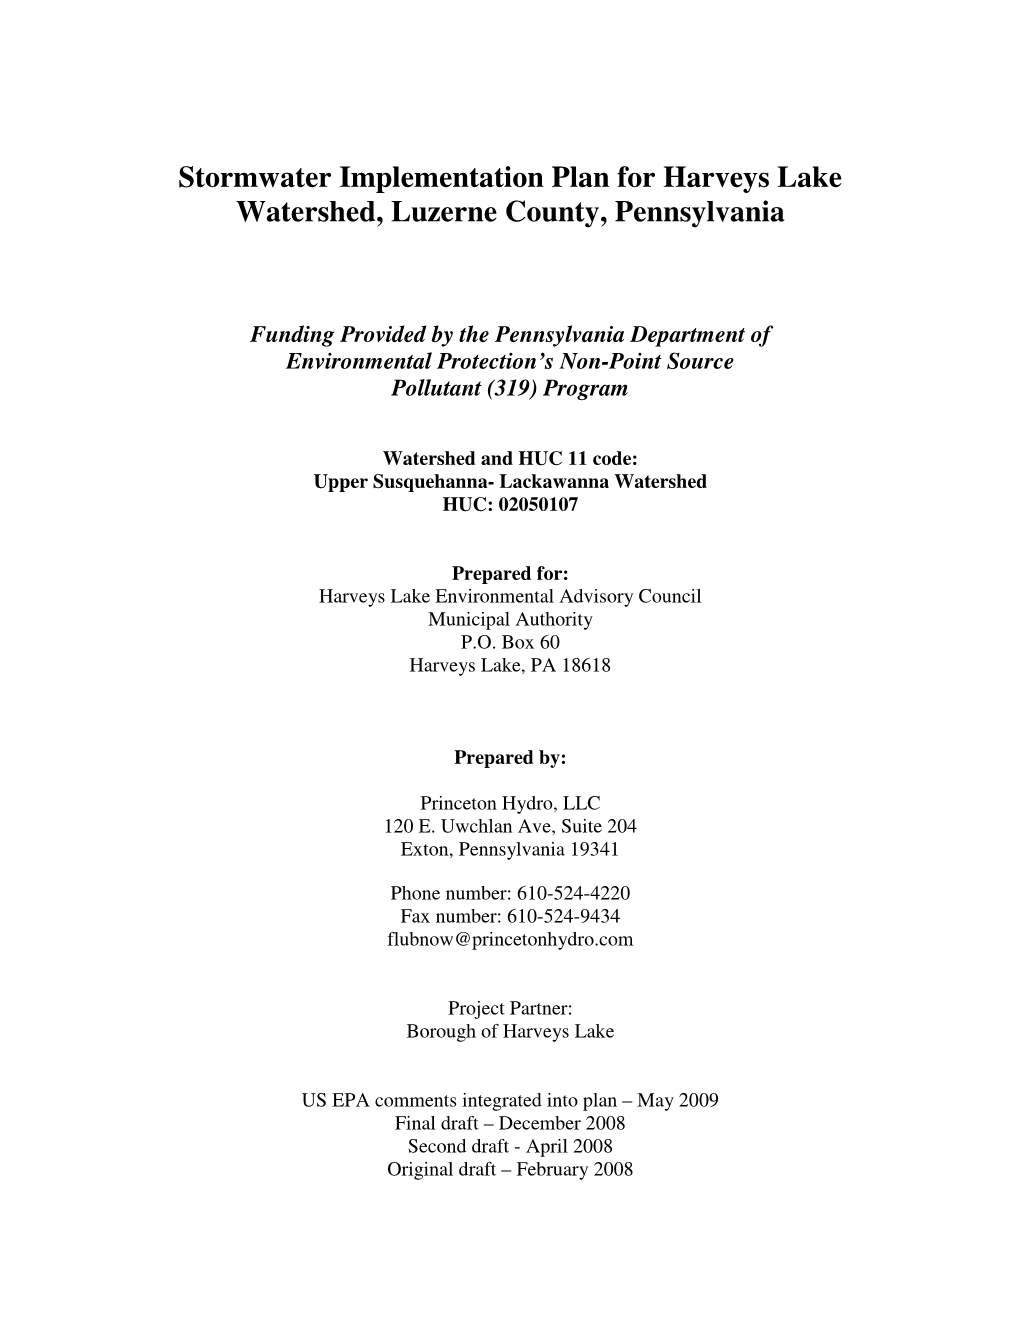 Stormwater Implementation Plan for Harveys Lake Watershed, Luzerne County, Pennsylvania